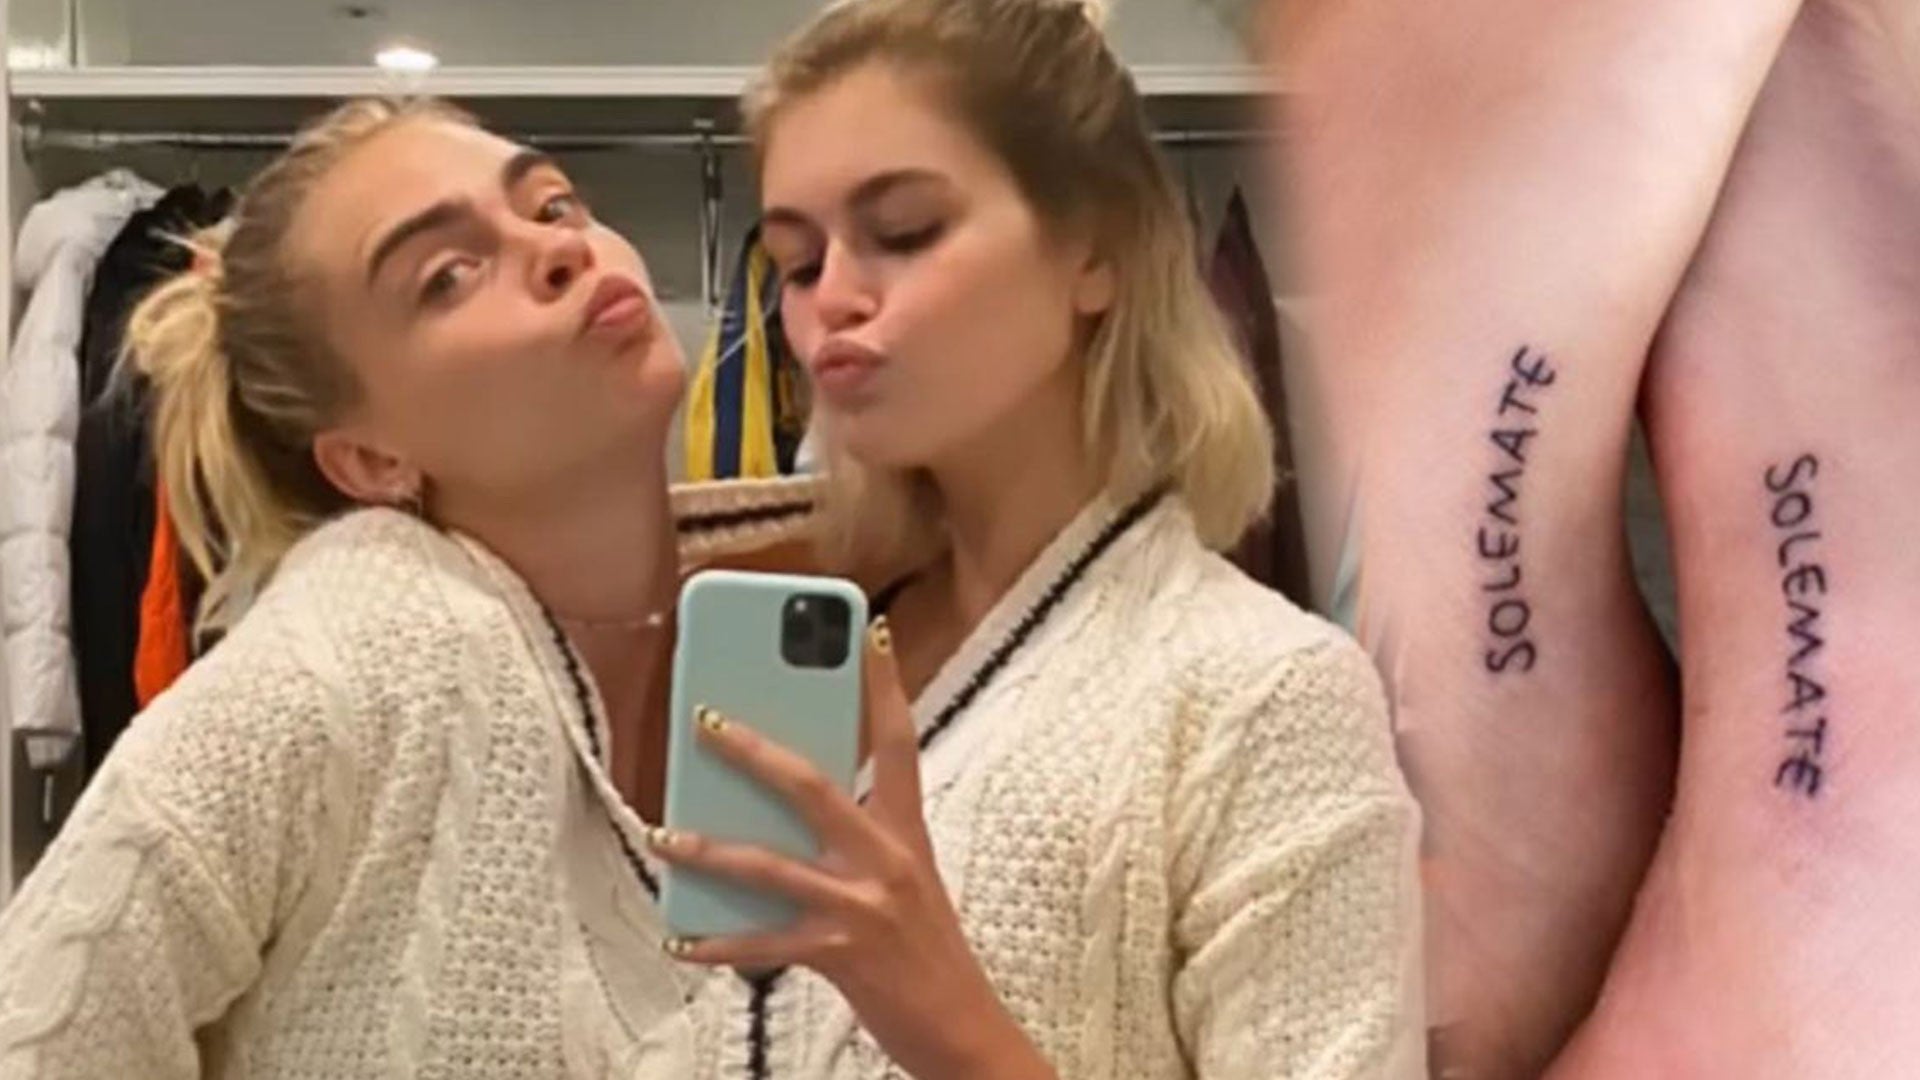 Cara Delevingne Name Writing Upper Arm Tattoo  Steal Her Style